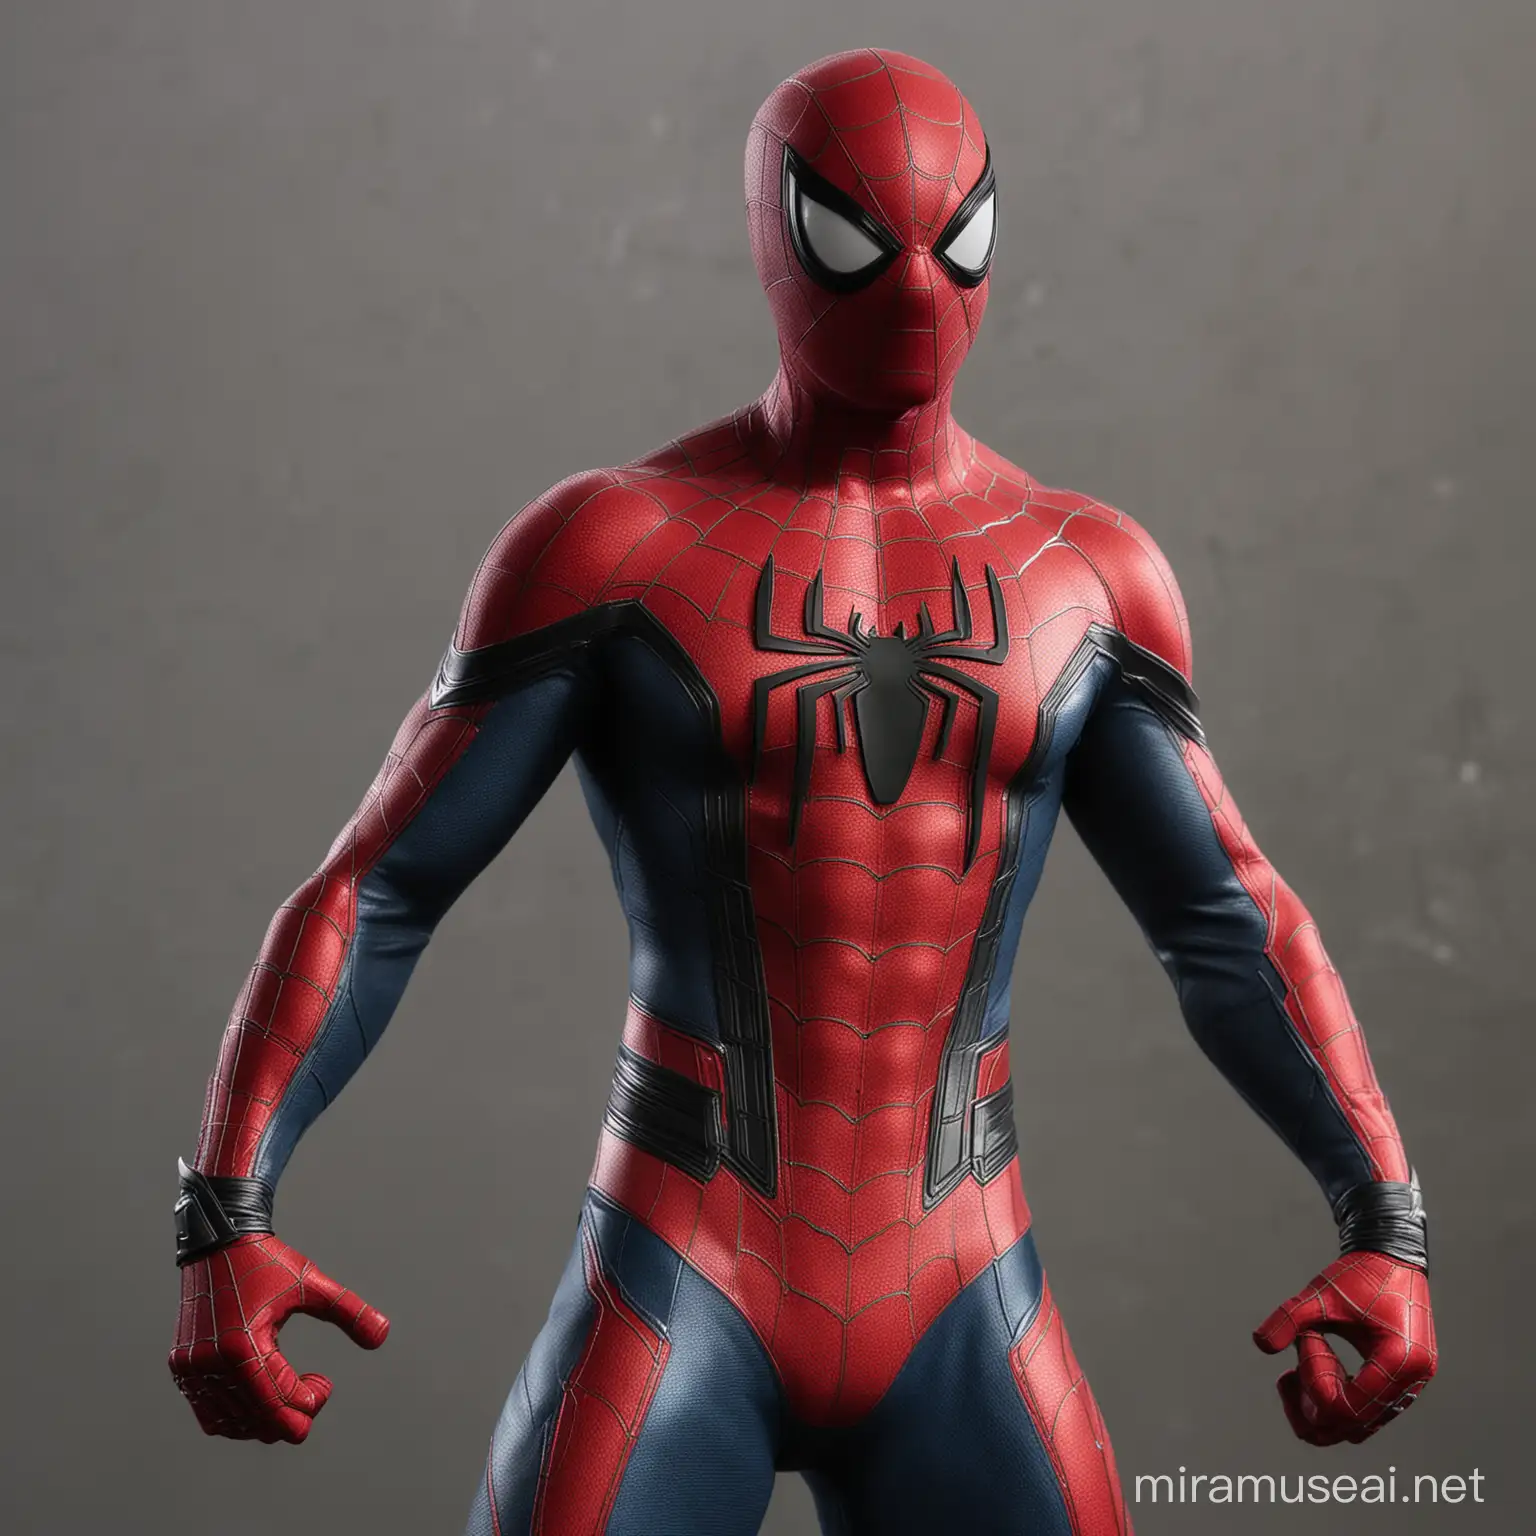 Spiderman in Iconic Red and Blue Suit with Intricate Black Web Design